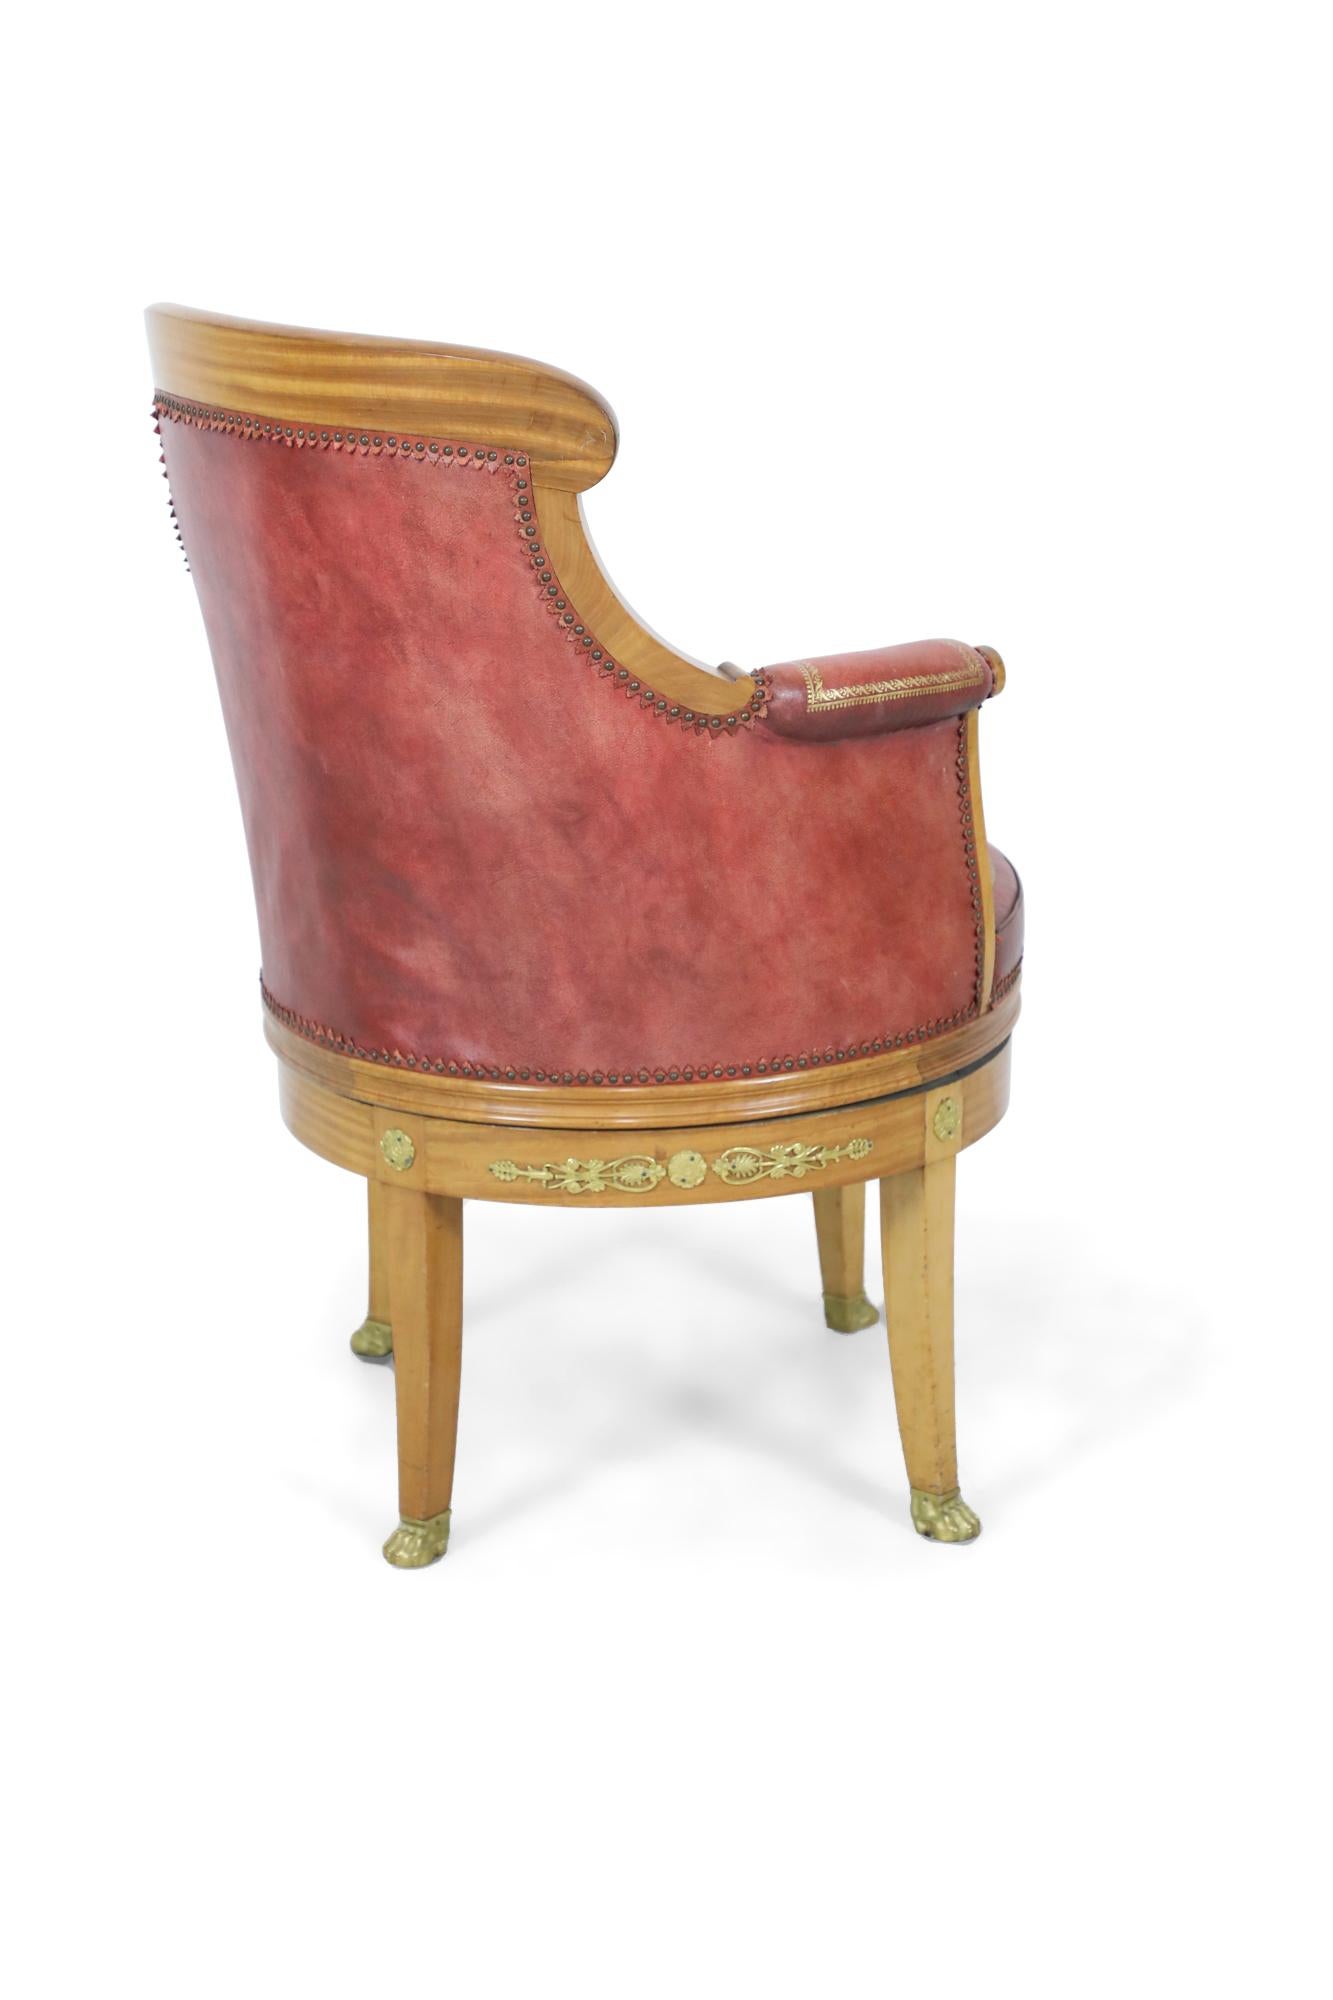 French Empire Blond Mahogany Swivel Leather Chair with Bronze Trim For Sale 2